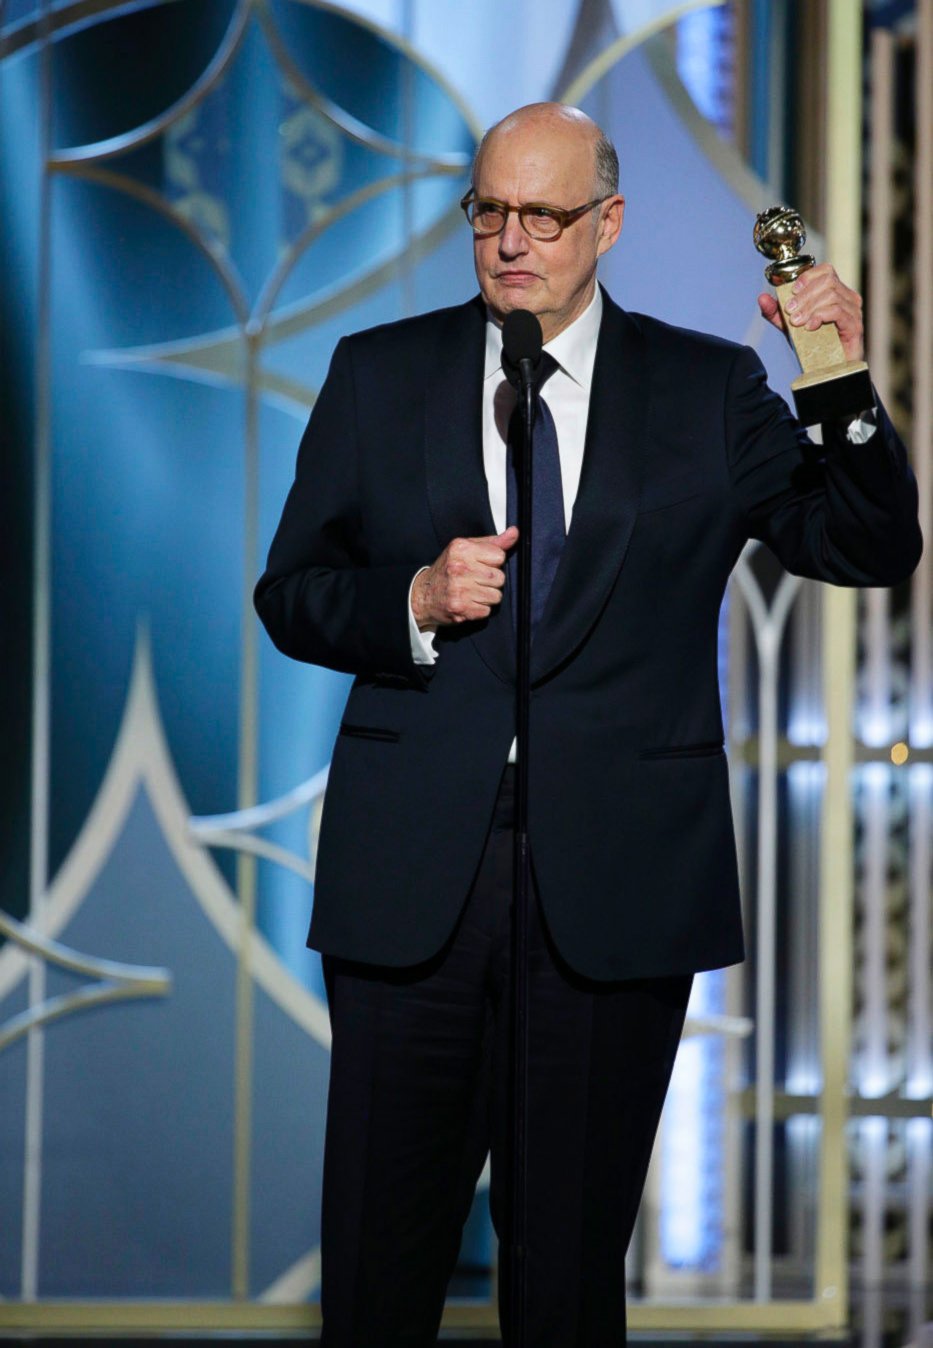 PHOTO: Jeffrey Tambor accepts the award for best actor in a TV series, comedy or musical for his role in "Transparent", at the 72nd Annual Golden Globe Awards, Jan. 11, 2015, at the Beverly Hilton Hotel in Beverly Hills, Calif. 